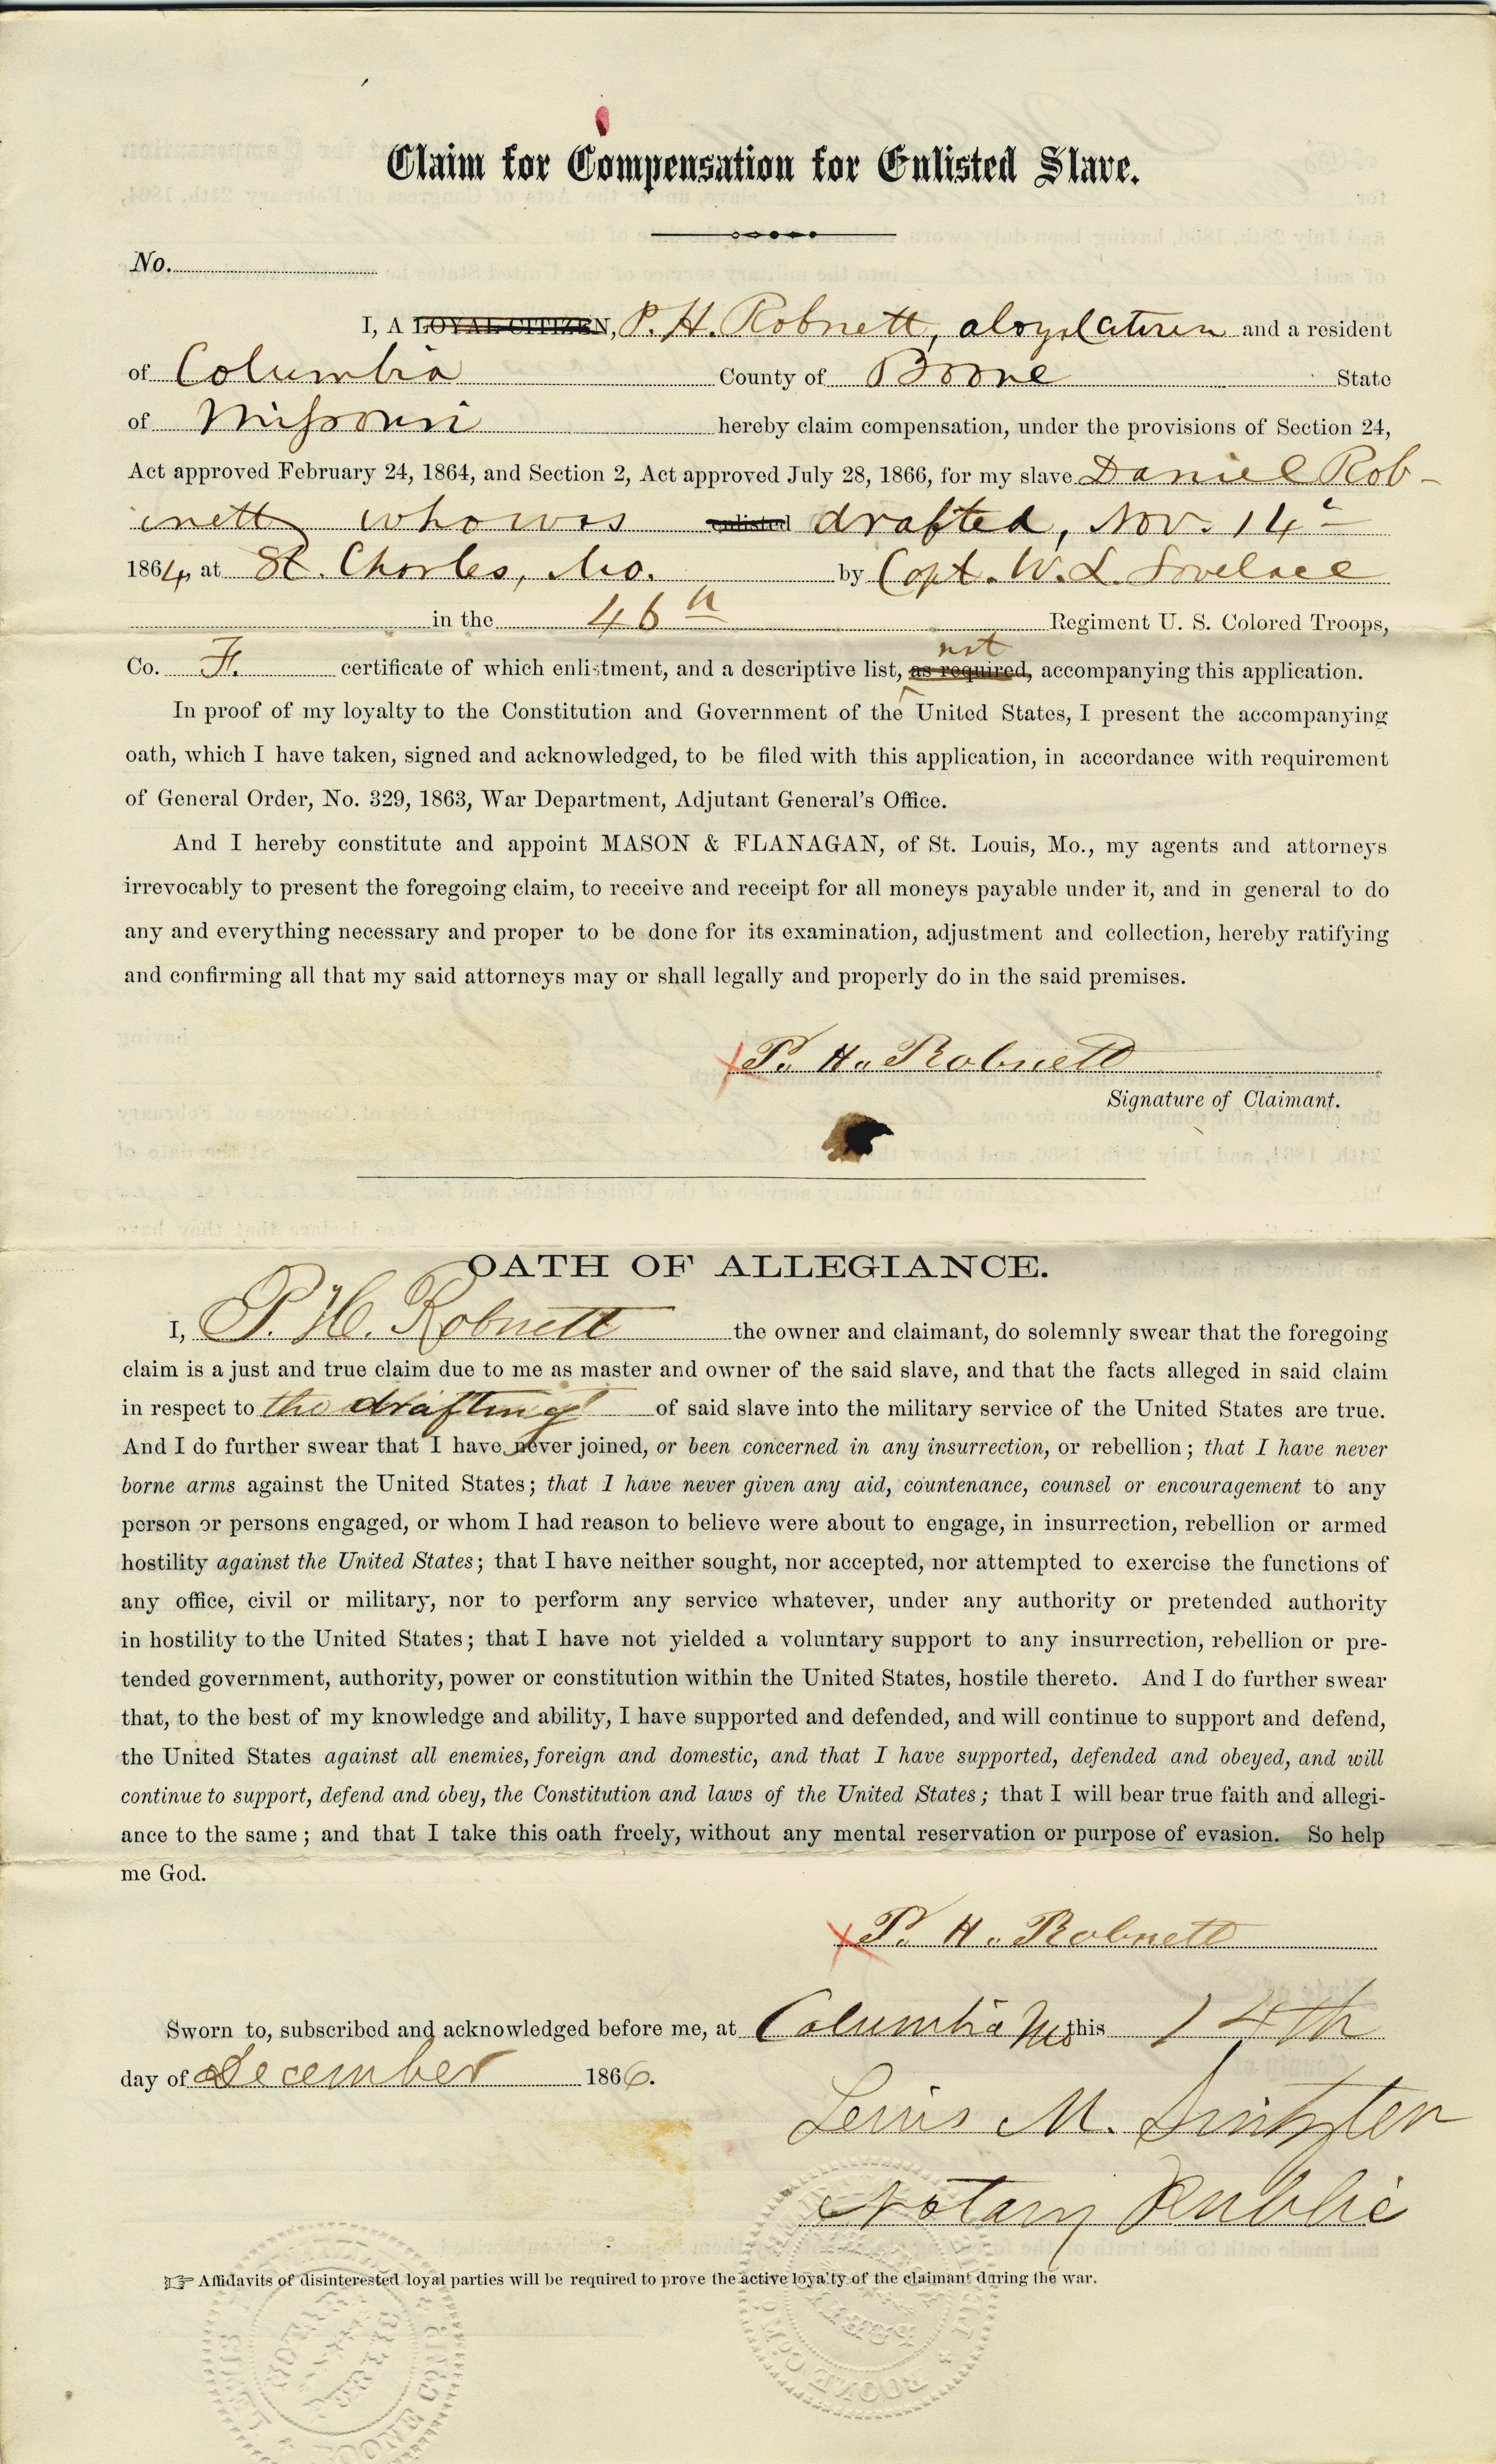 Image of a claim for compensation for an enlisted slave